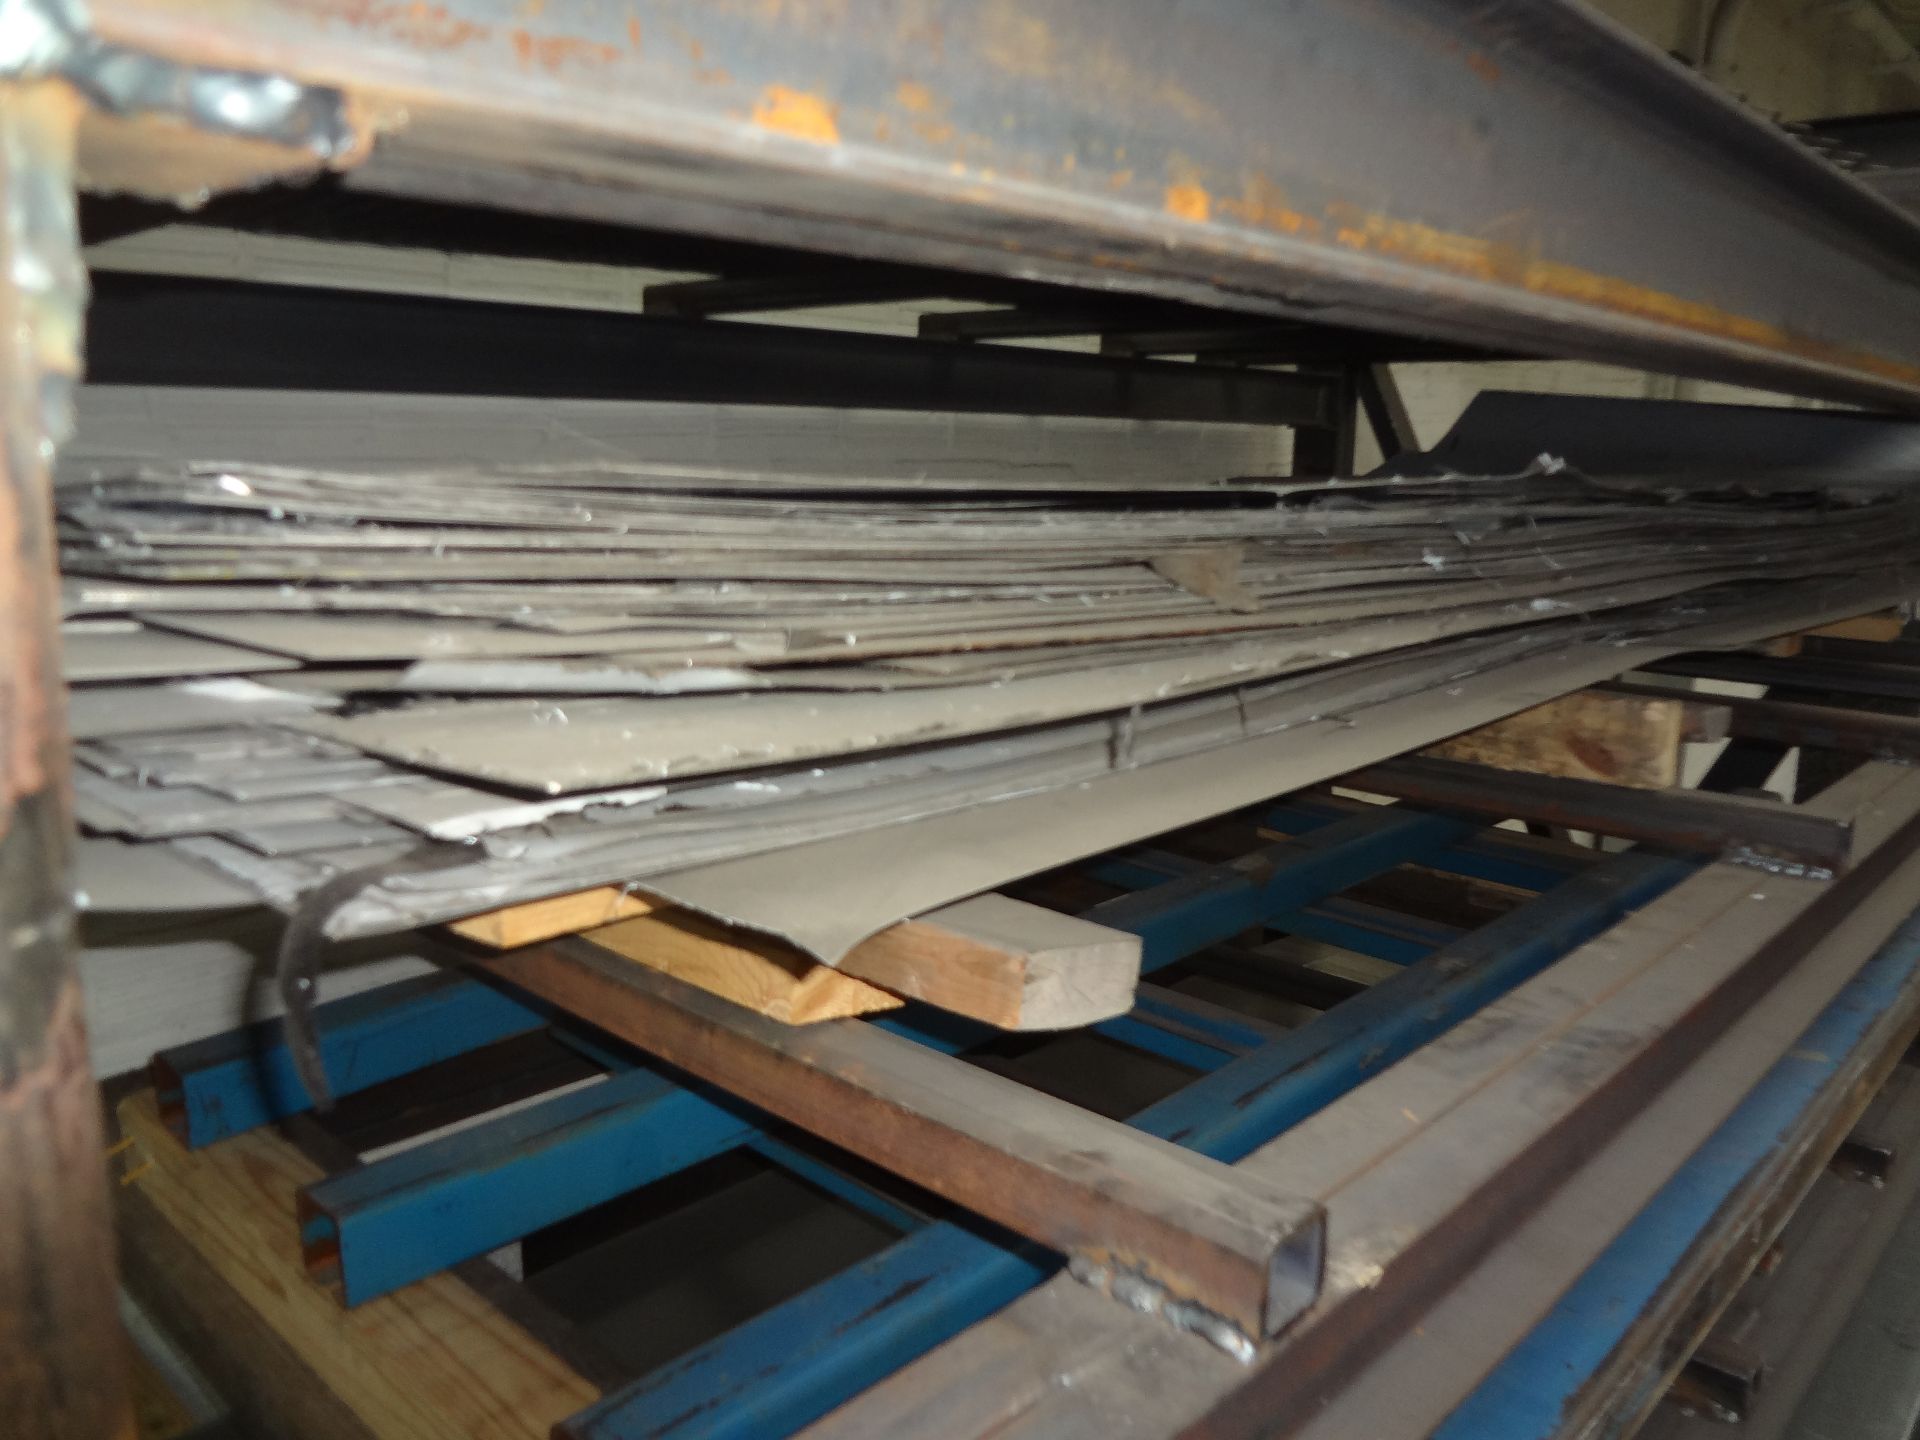 APPROXIMATELY [30] STAINLESS STEEL SHEETS